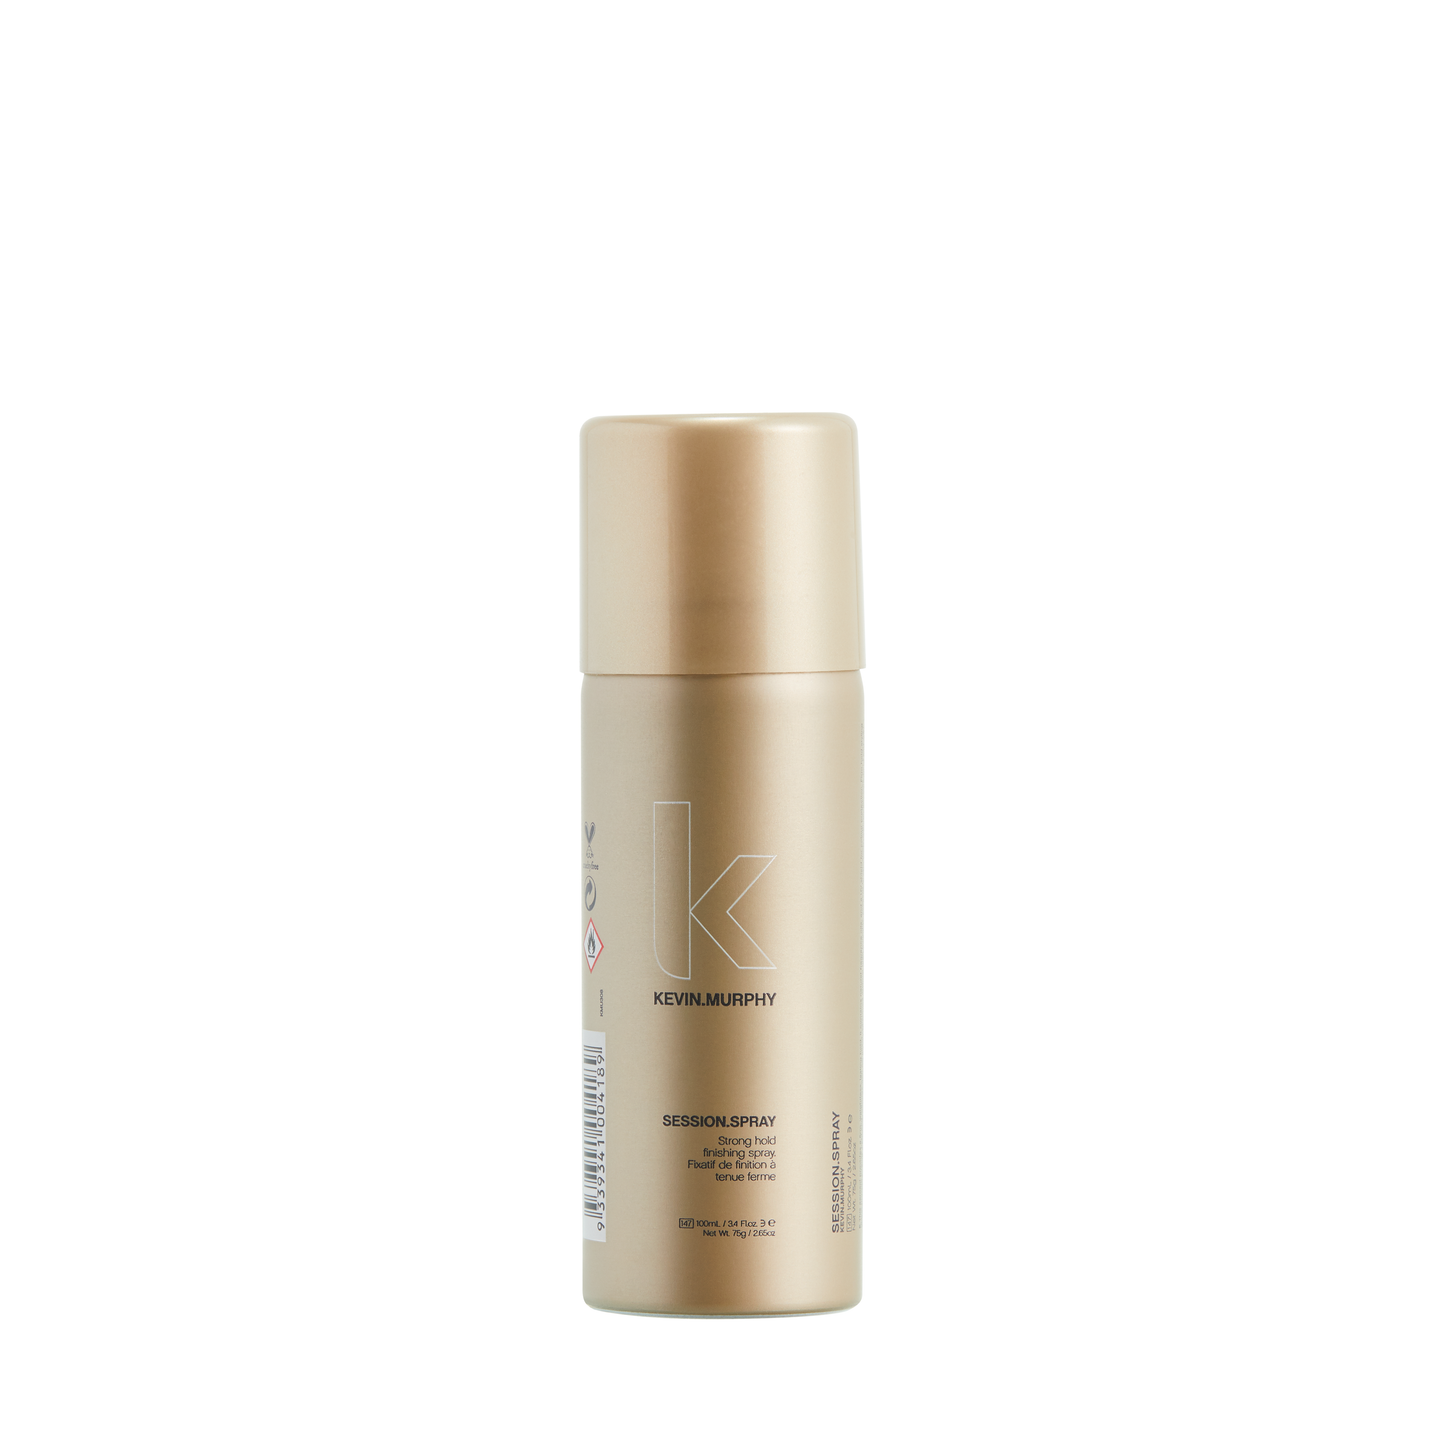 KEVIN.MURPHY - SESSION.SPRAY